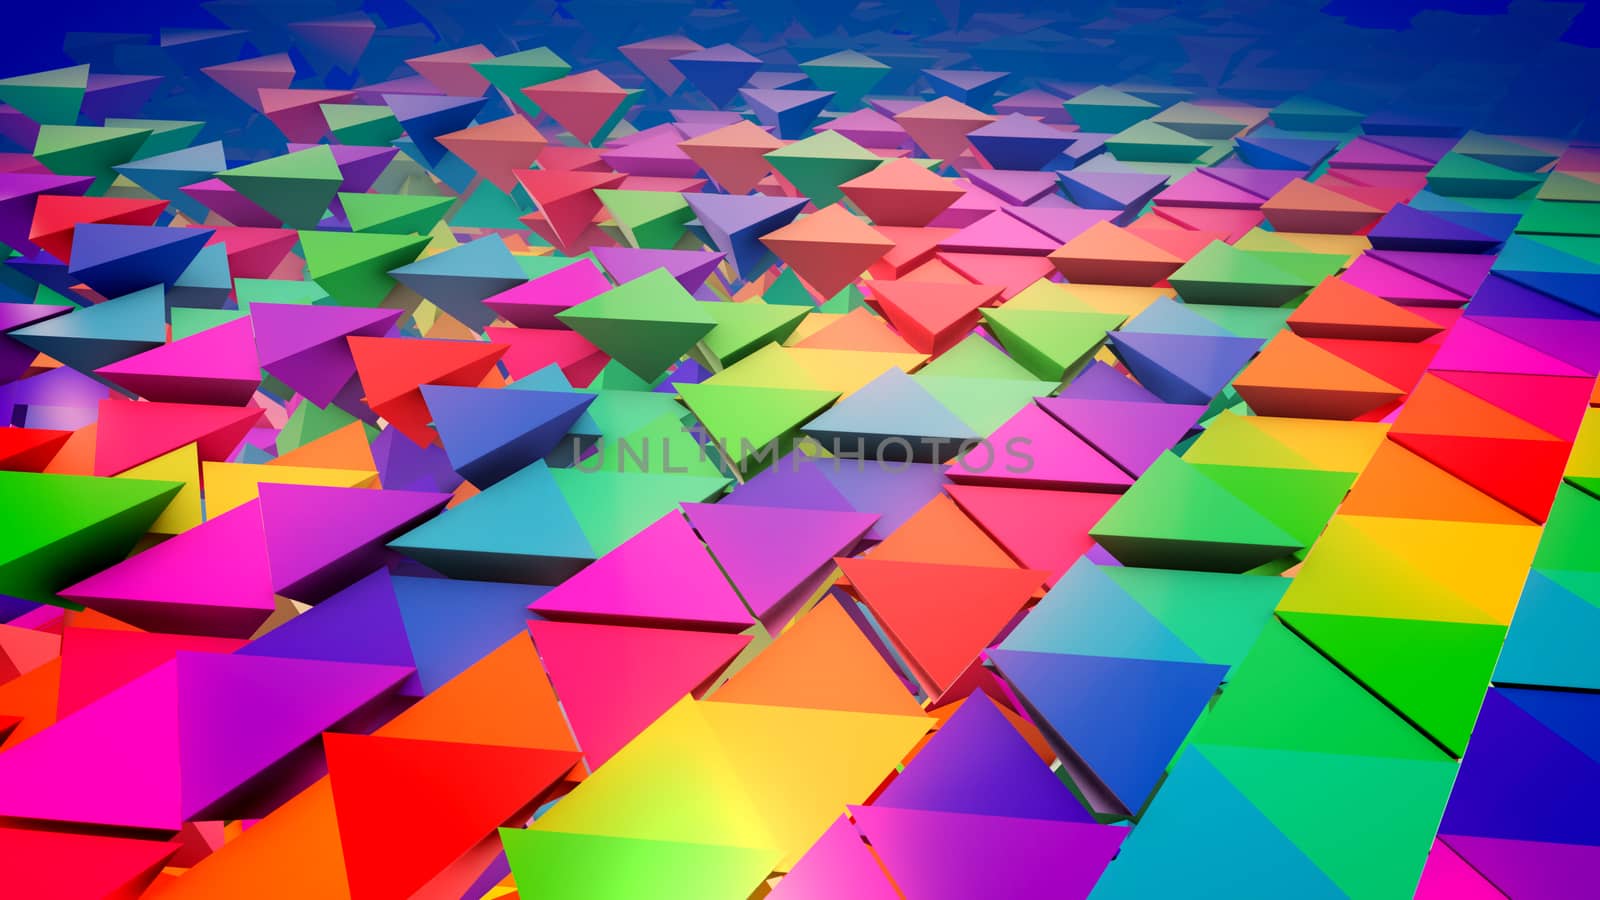 Inspiring 3d illustration of multicolored pyramids placed in straight and lengthy rows like a flat surface with pyramids bottoms put up. It looks optimistic, innovative and funny.